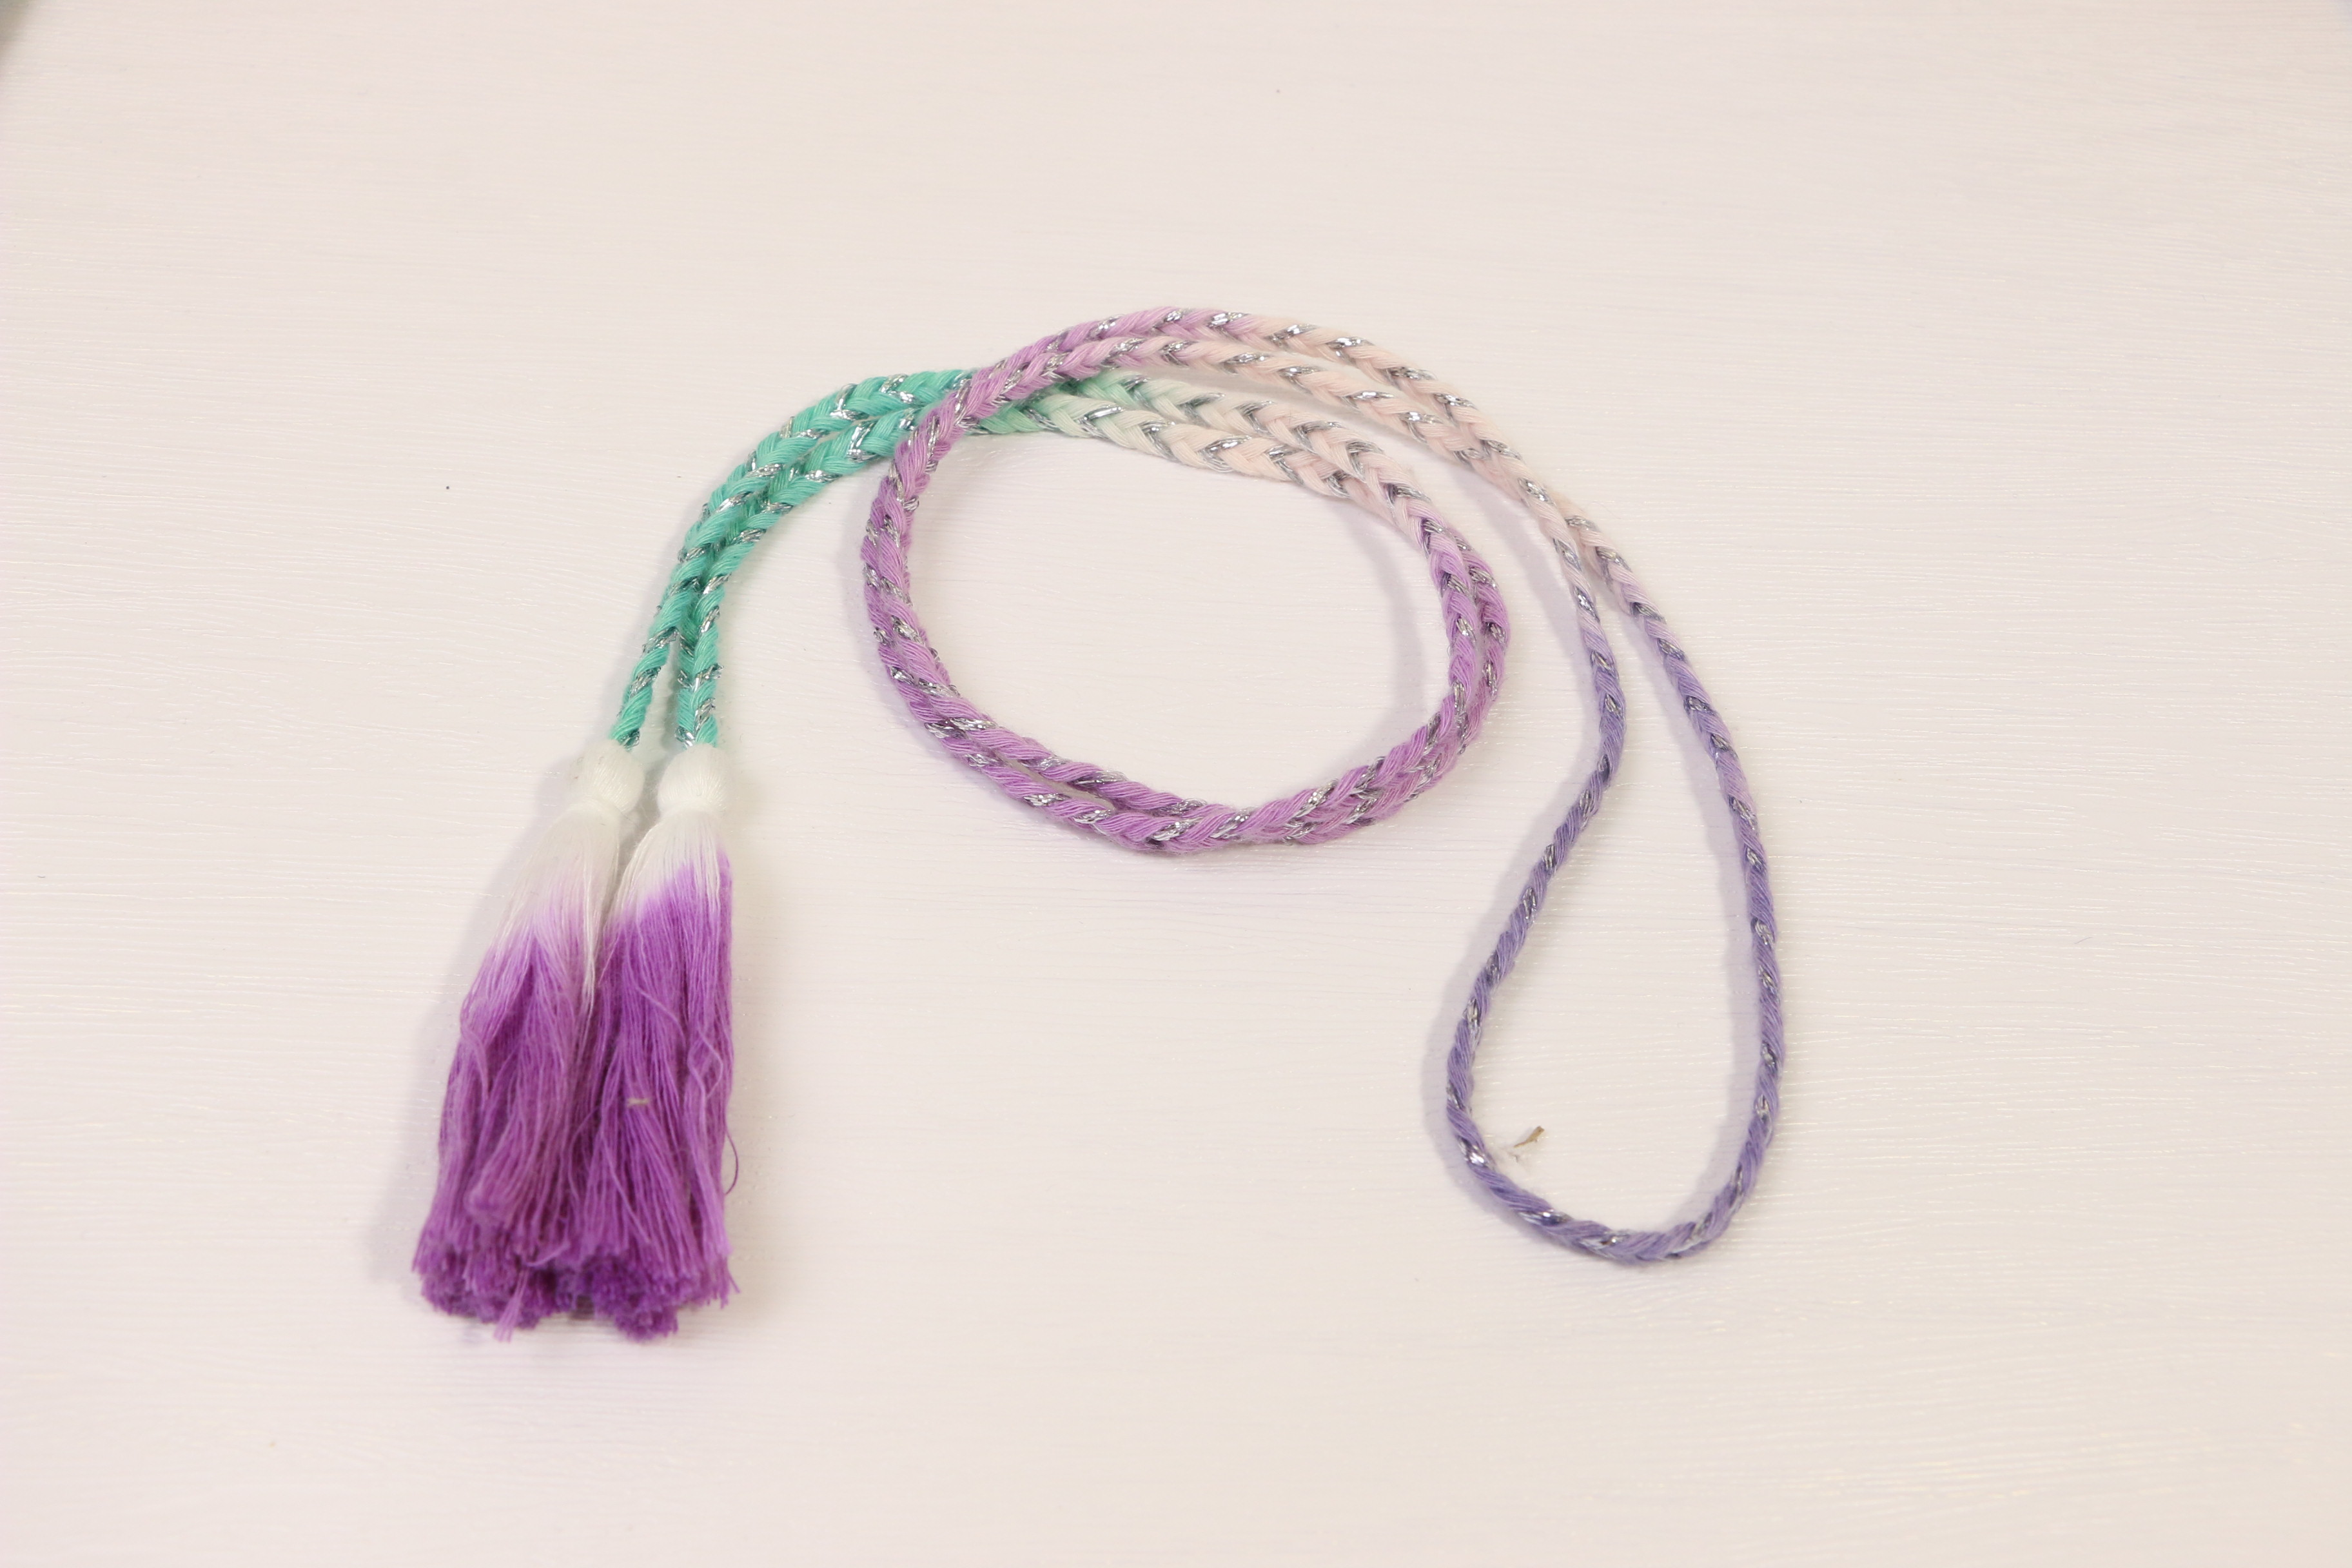  Dip Dyed Gradient Multi Color Composite Drawcord With Silver Metallic Thread Manufactures